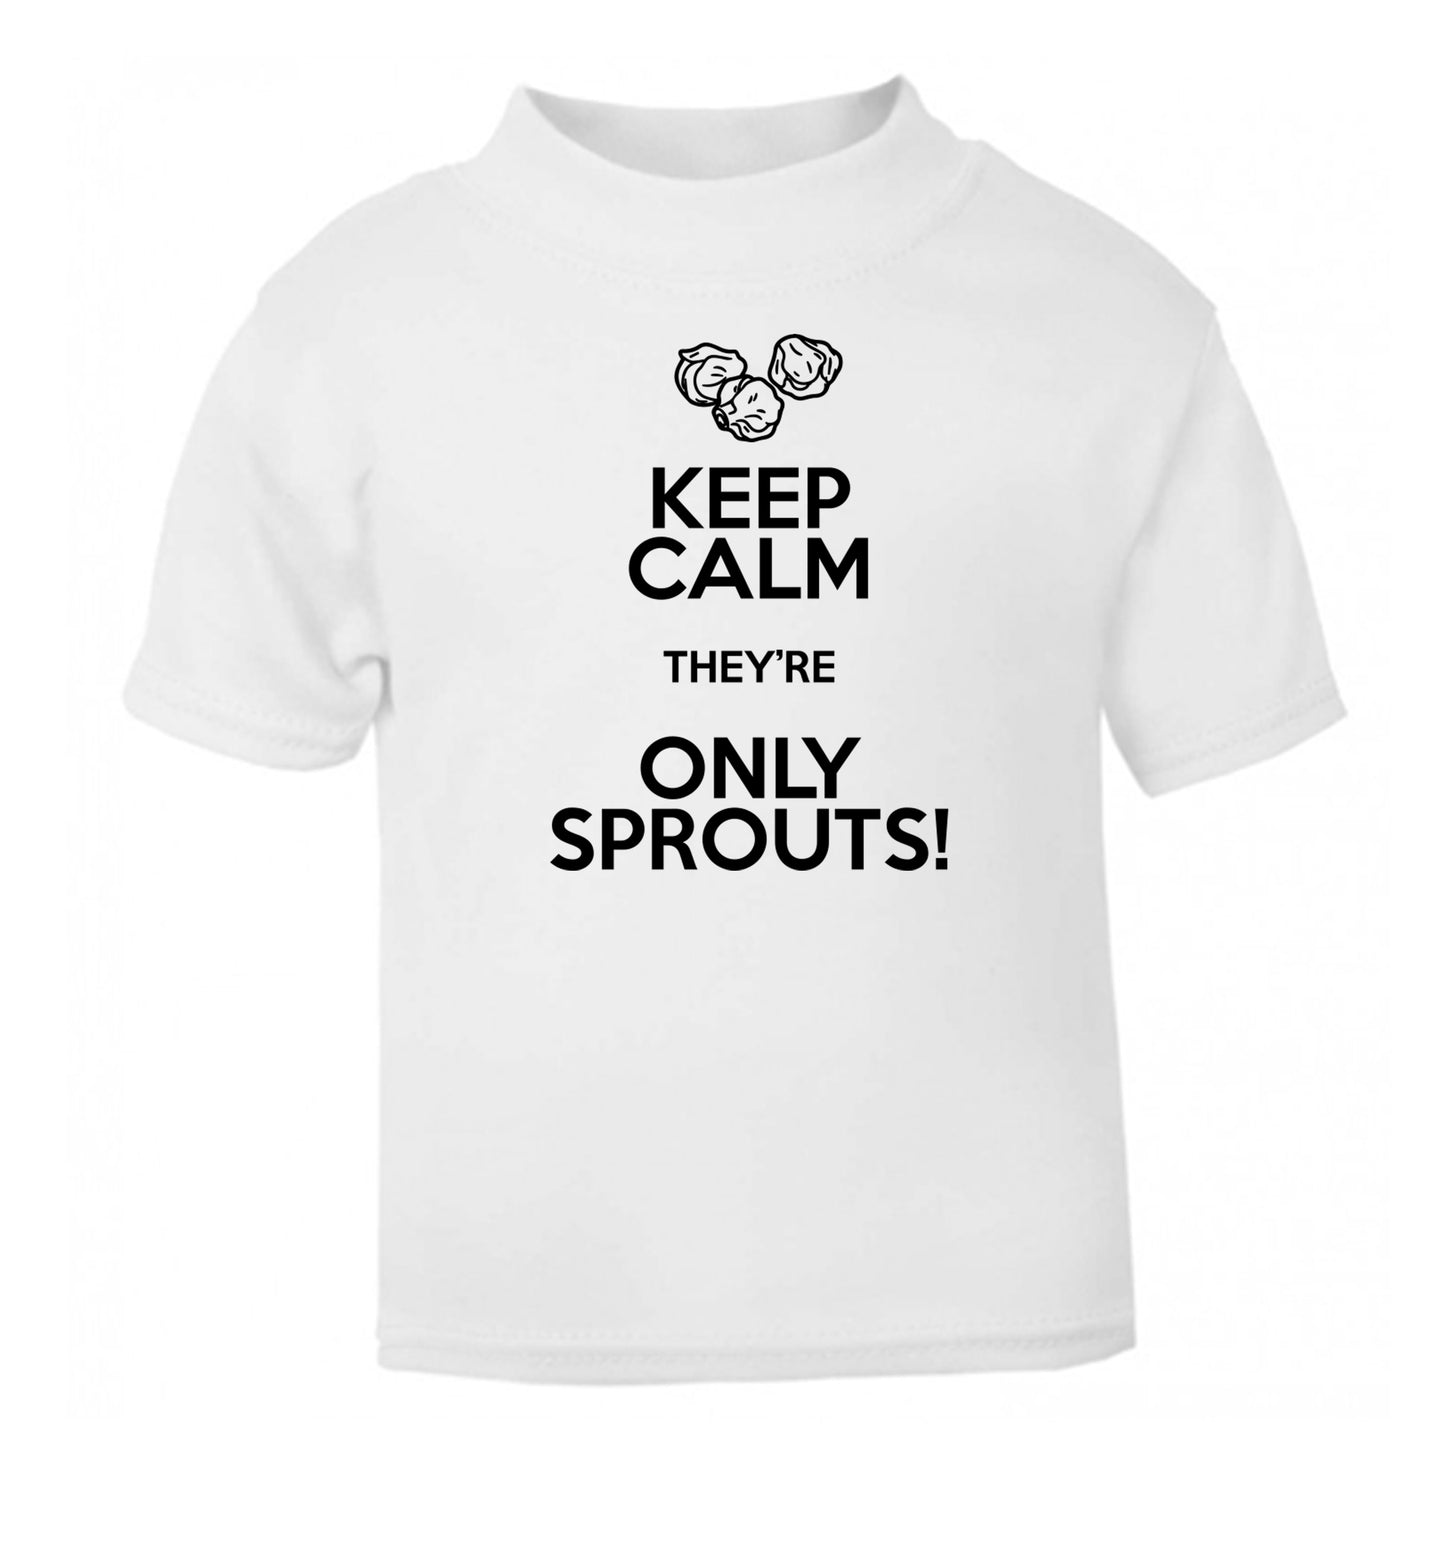 Keep calm they're only sprouts white Baby Toddler Tshirt 2 Years